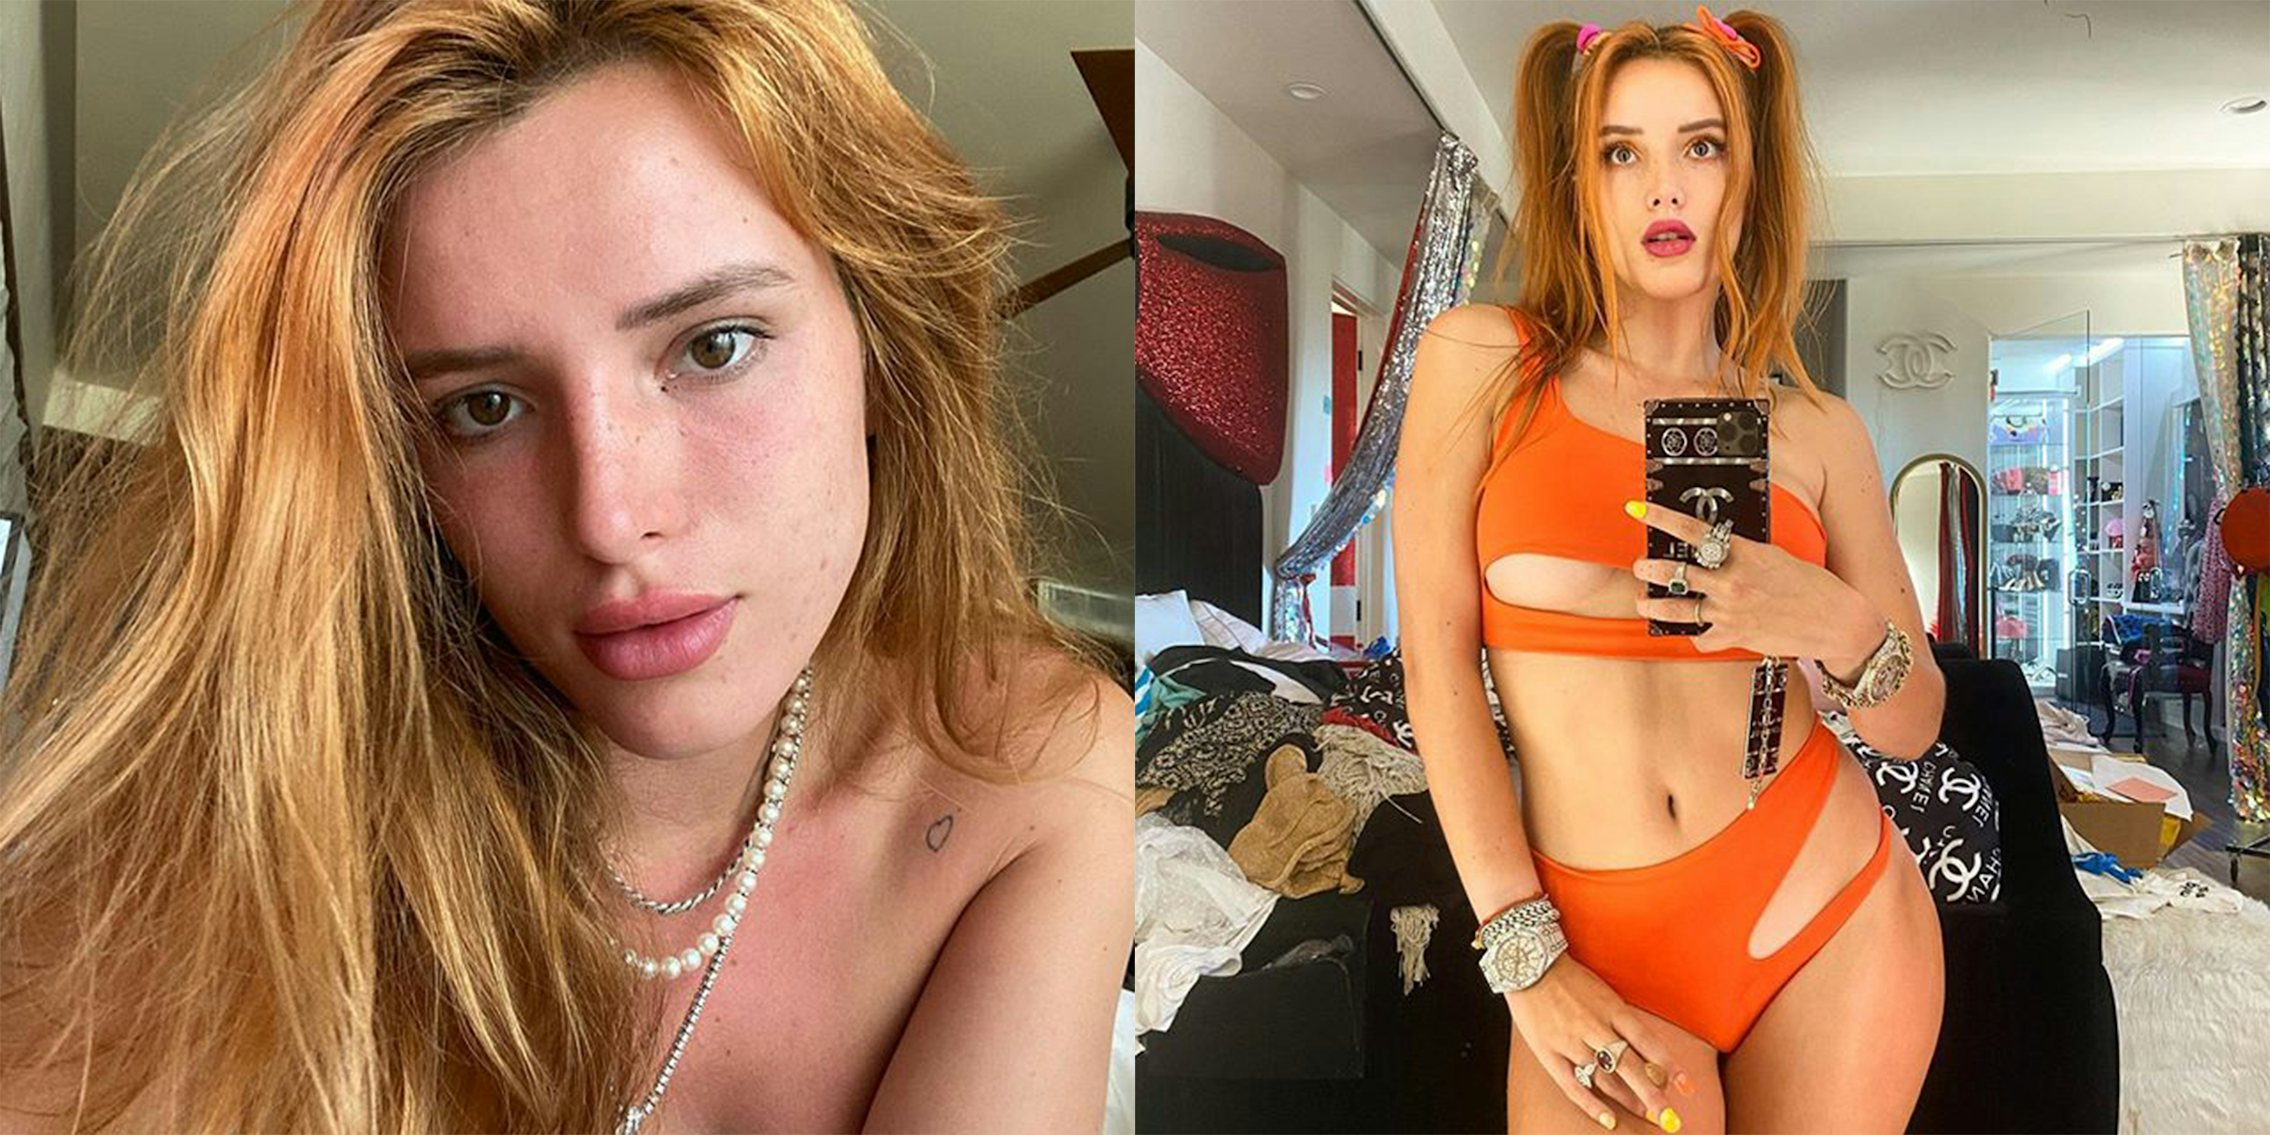 Bella Thorne Naked Having Sex - Sex Workers Say Bella Thorne Is Ruining OnlyFans With 'Scam'